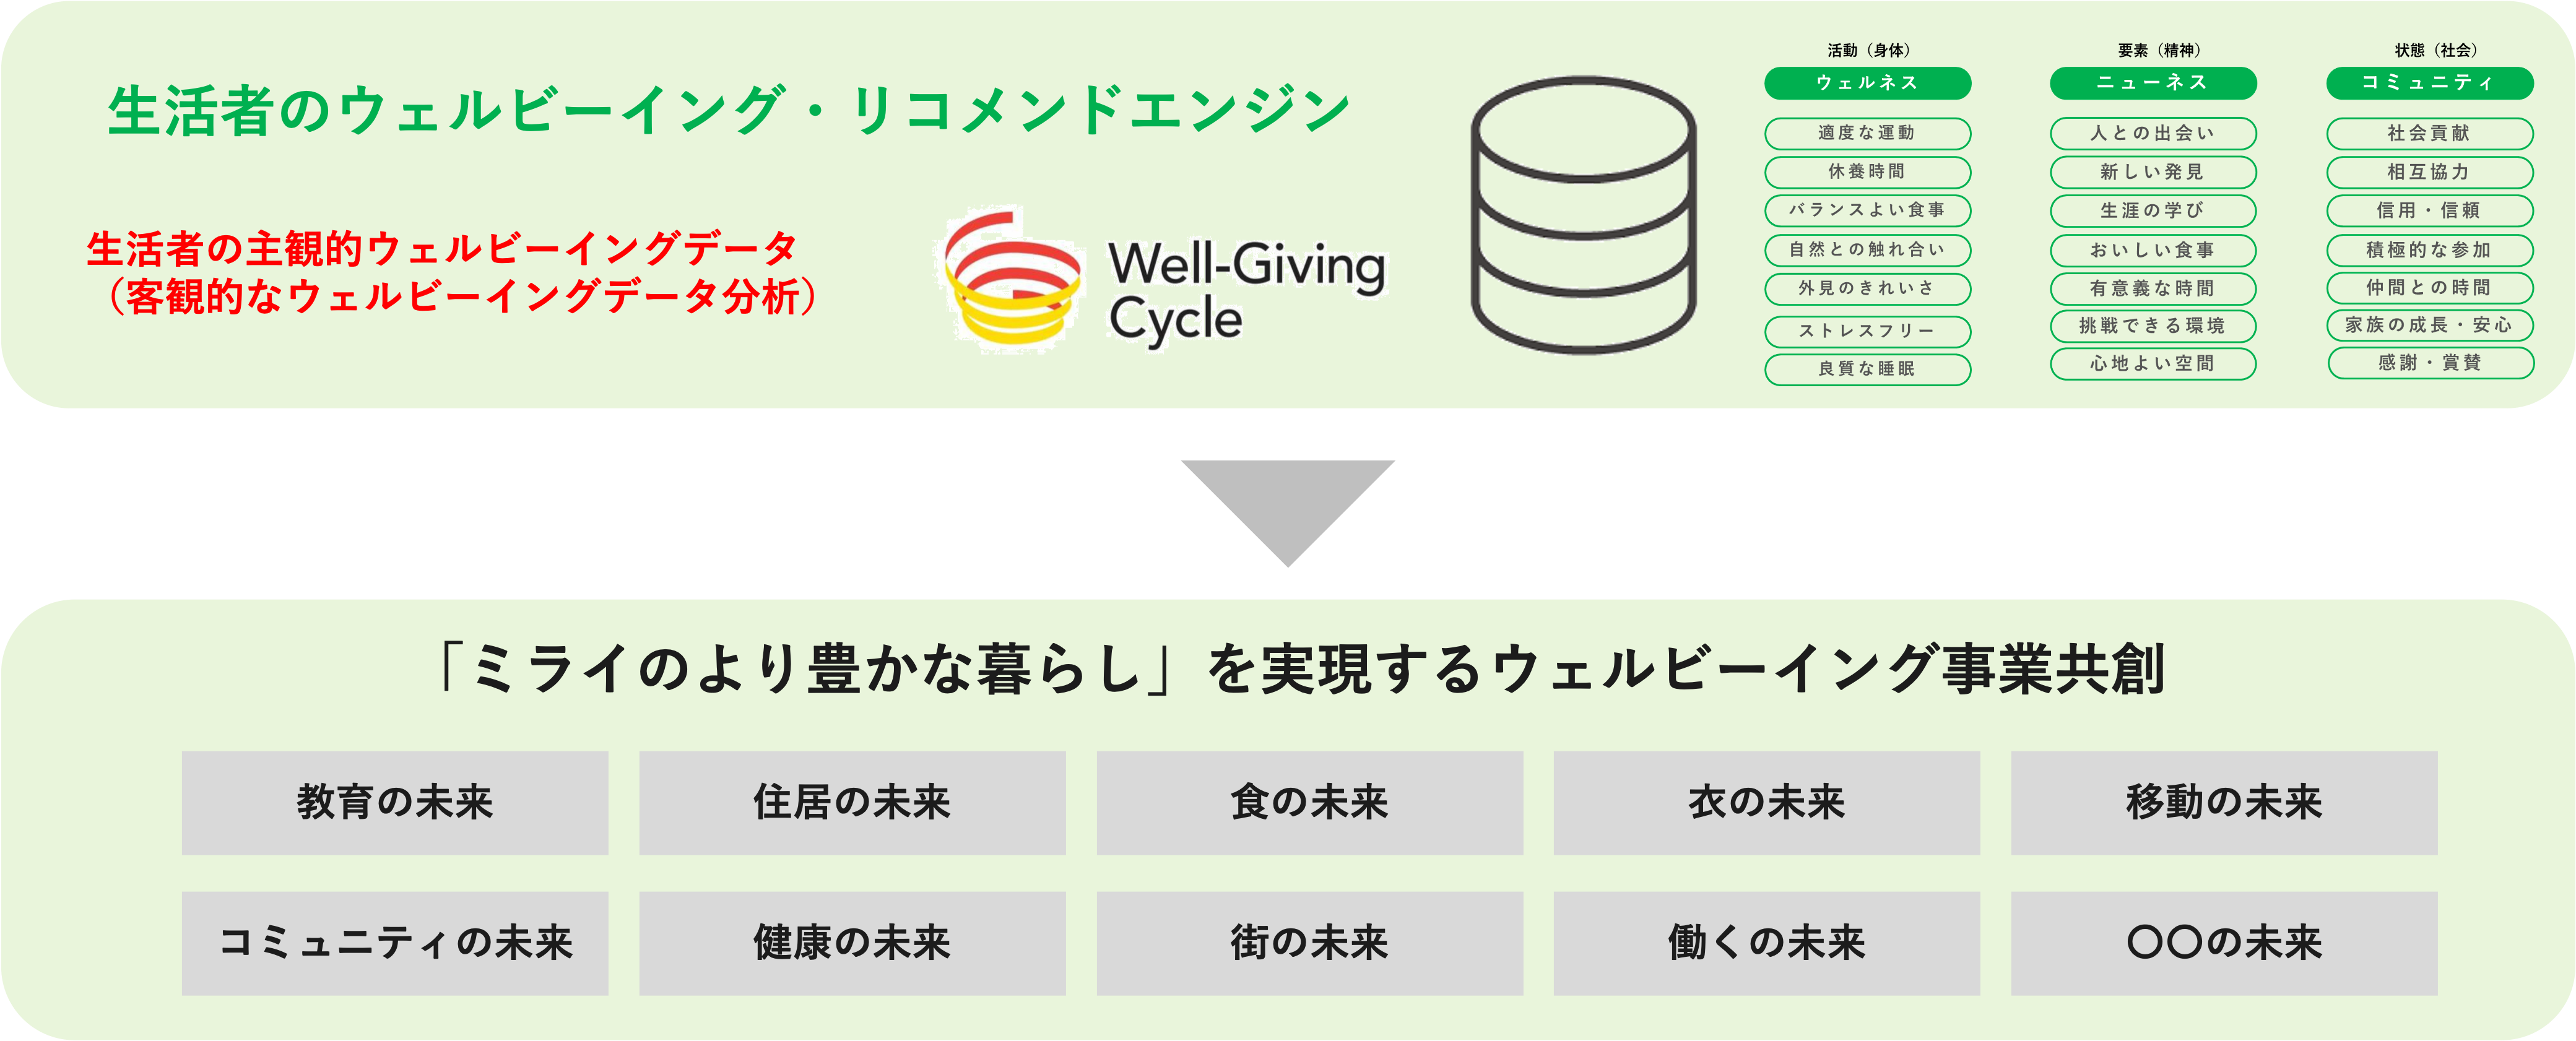 Well-Giving Cycle